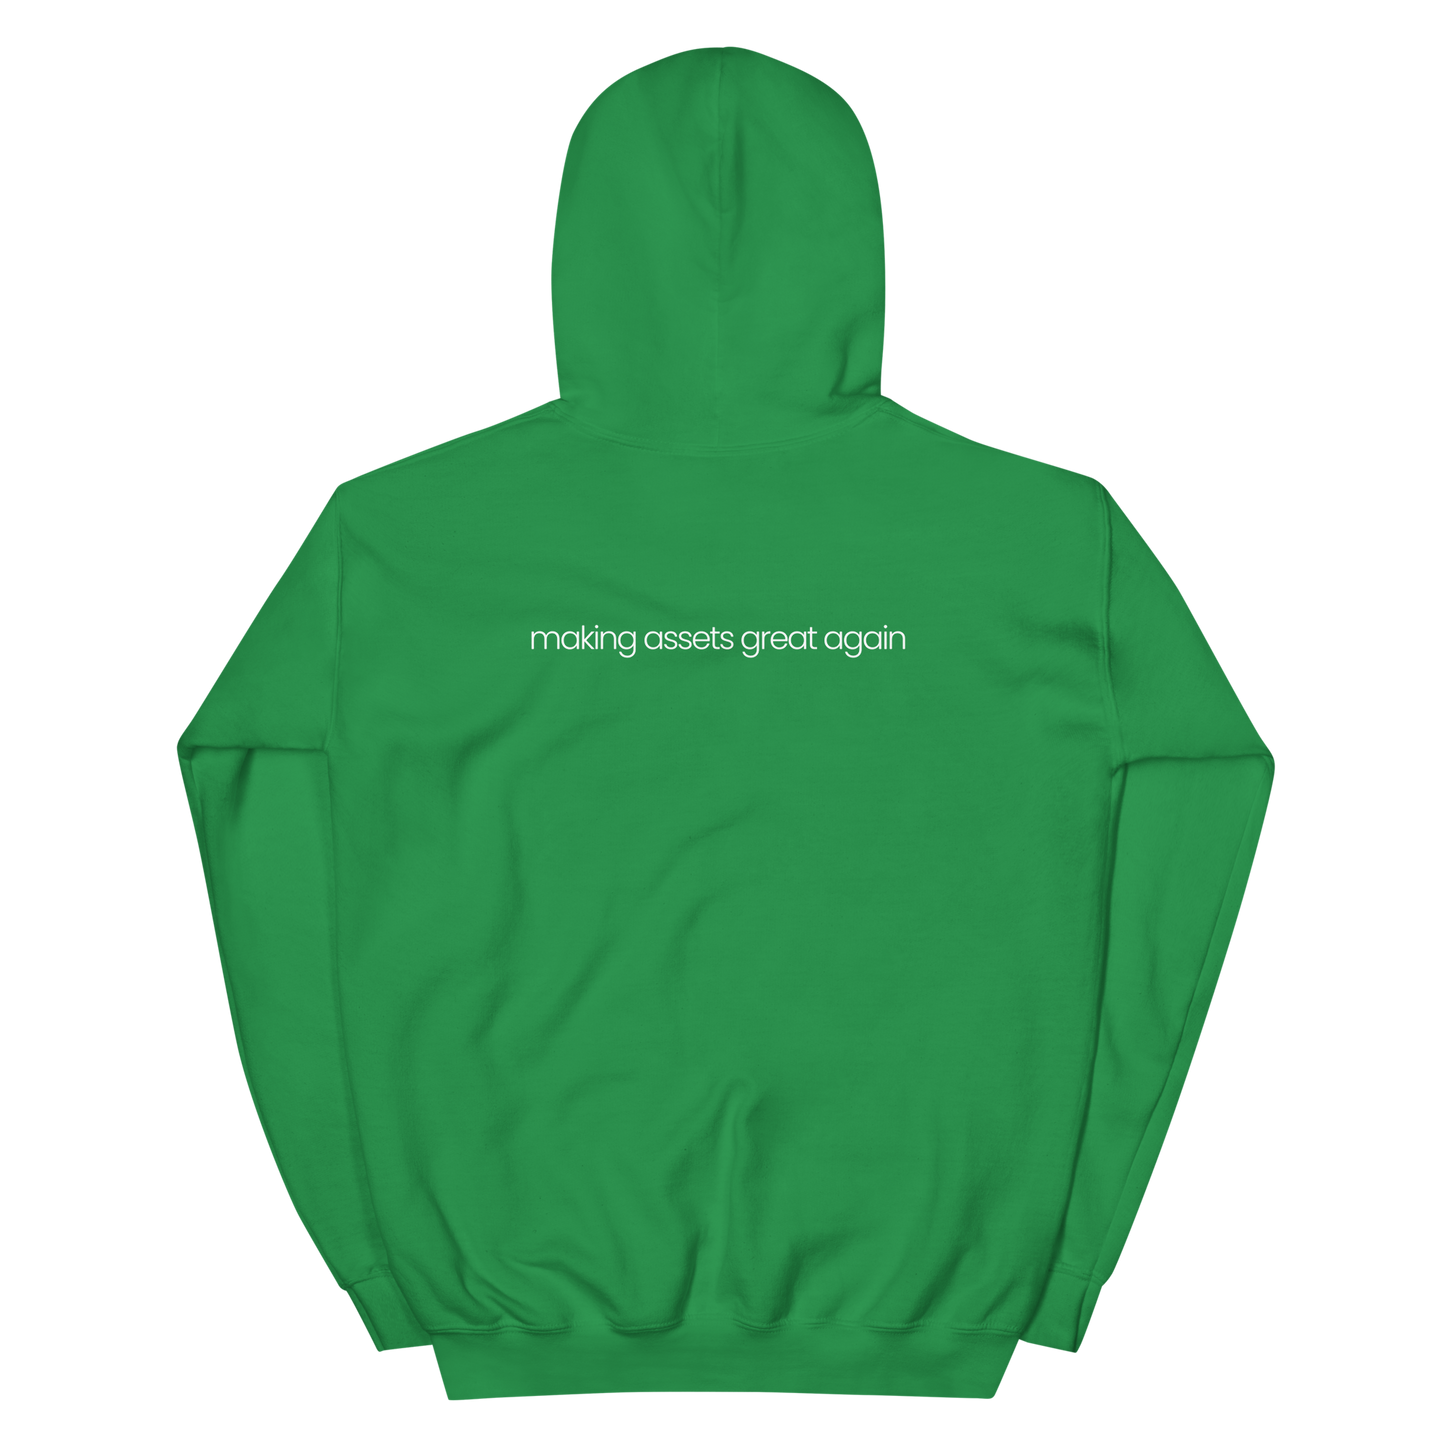 asset entities 2023 special edition hoodie : CRYPT0W0RLD